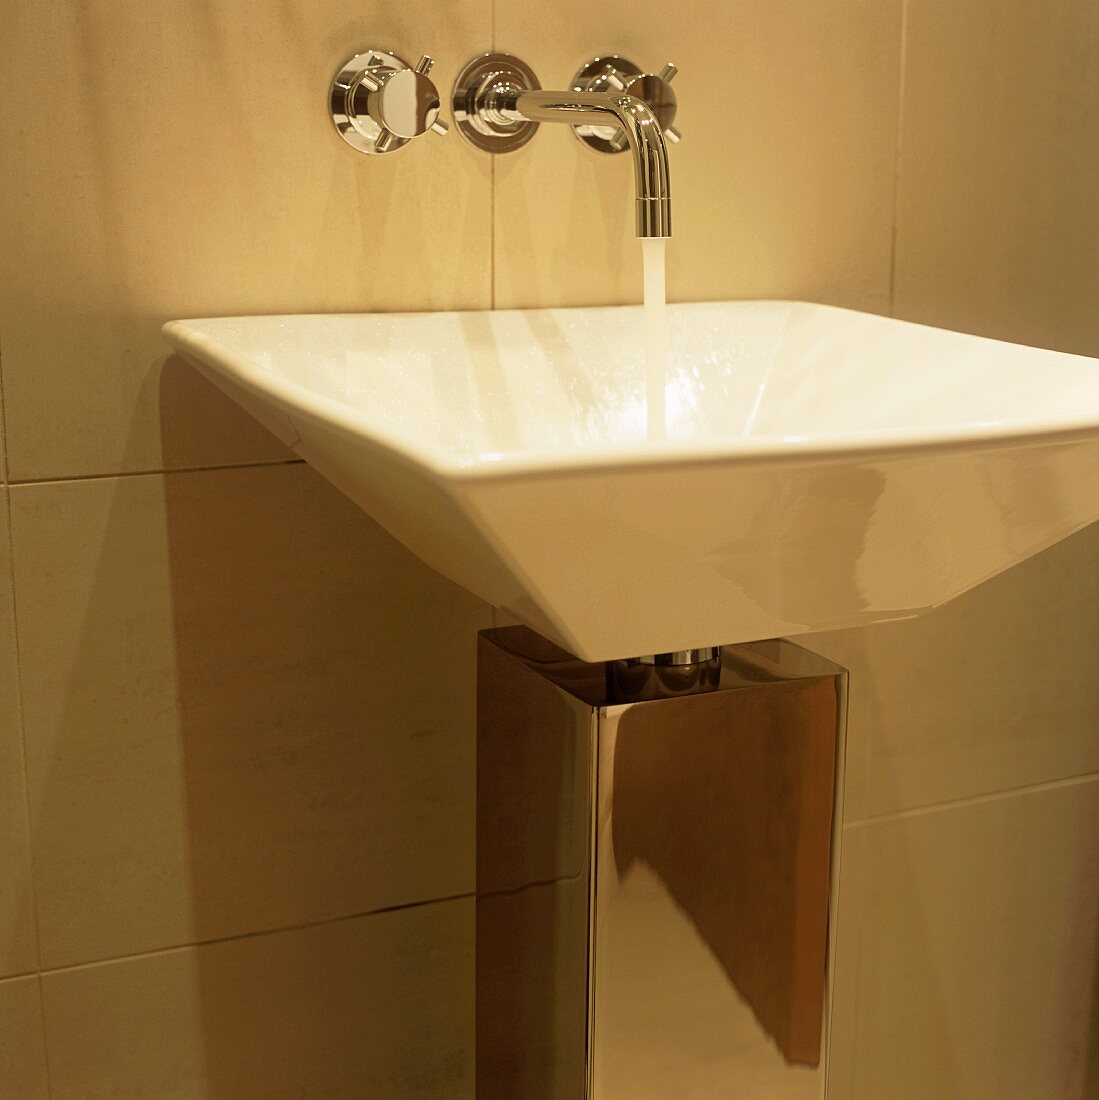 Water running from wall taps into a designer wash basin with chrome cladding around the outlet pipe